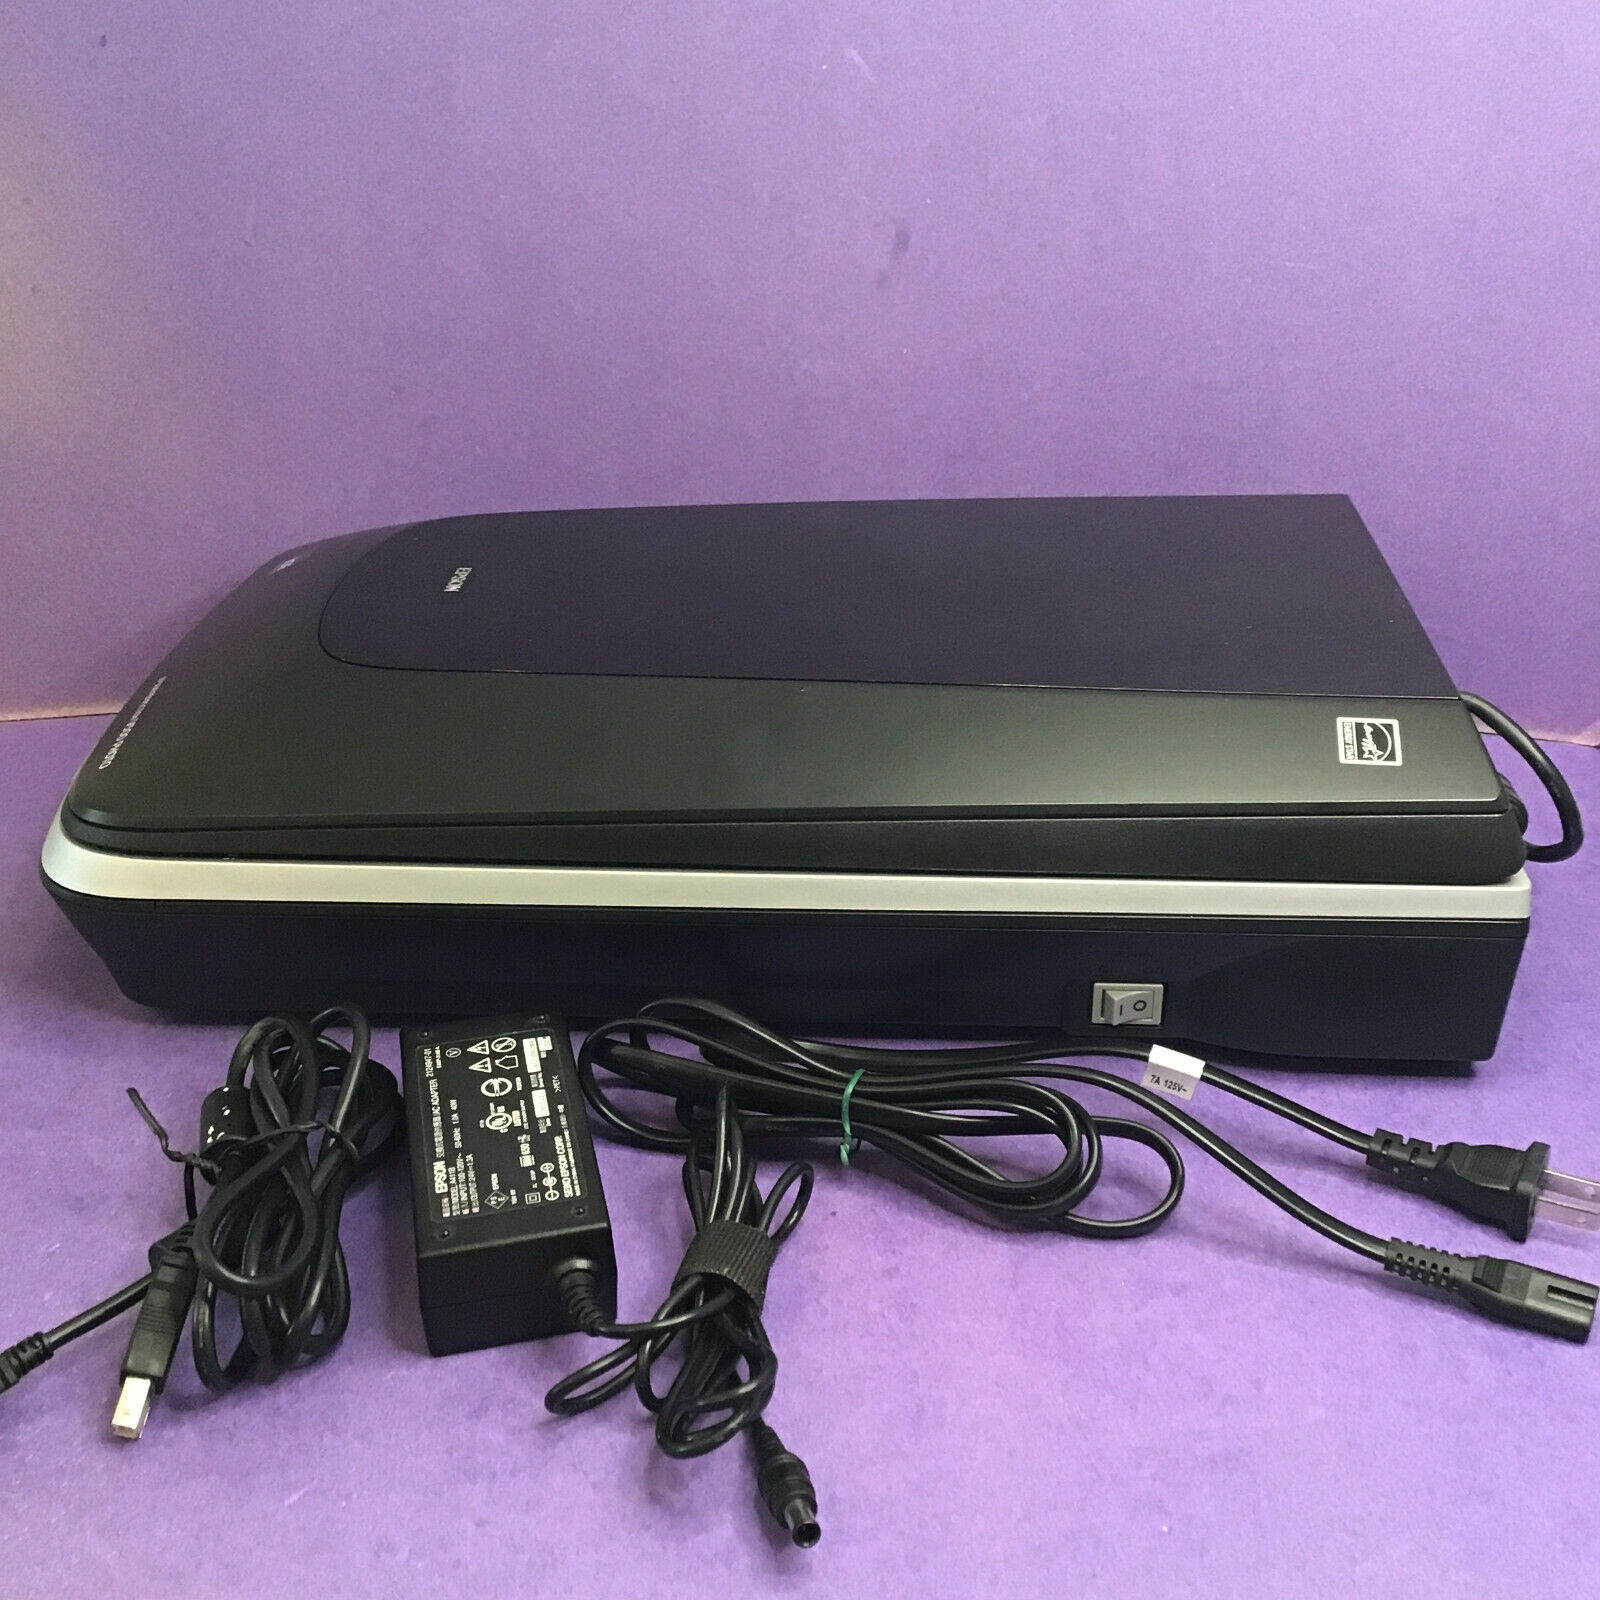 Epson Perfection V500 Photo Flatbed Scanner w/ OEM Power Supply cable/USB  cable 10343866089 | eBay